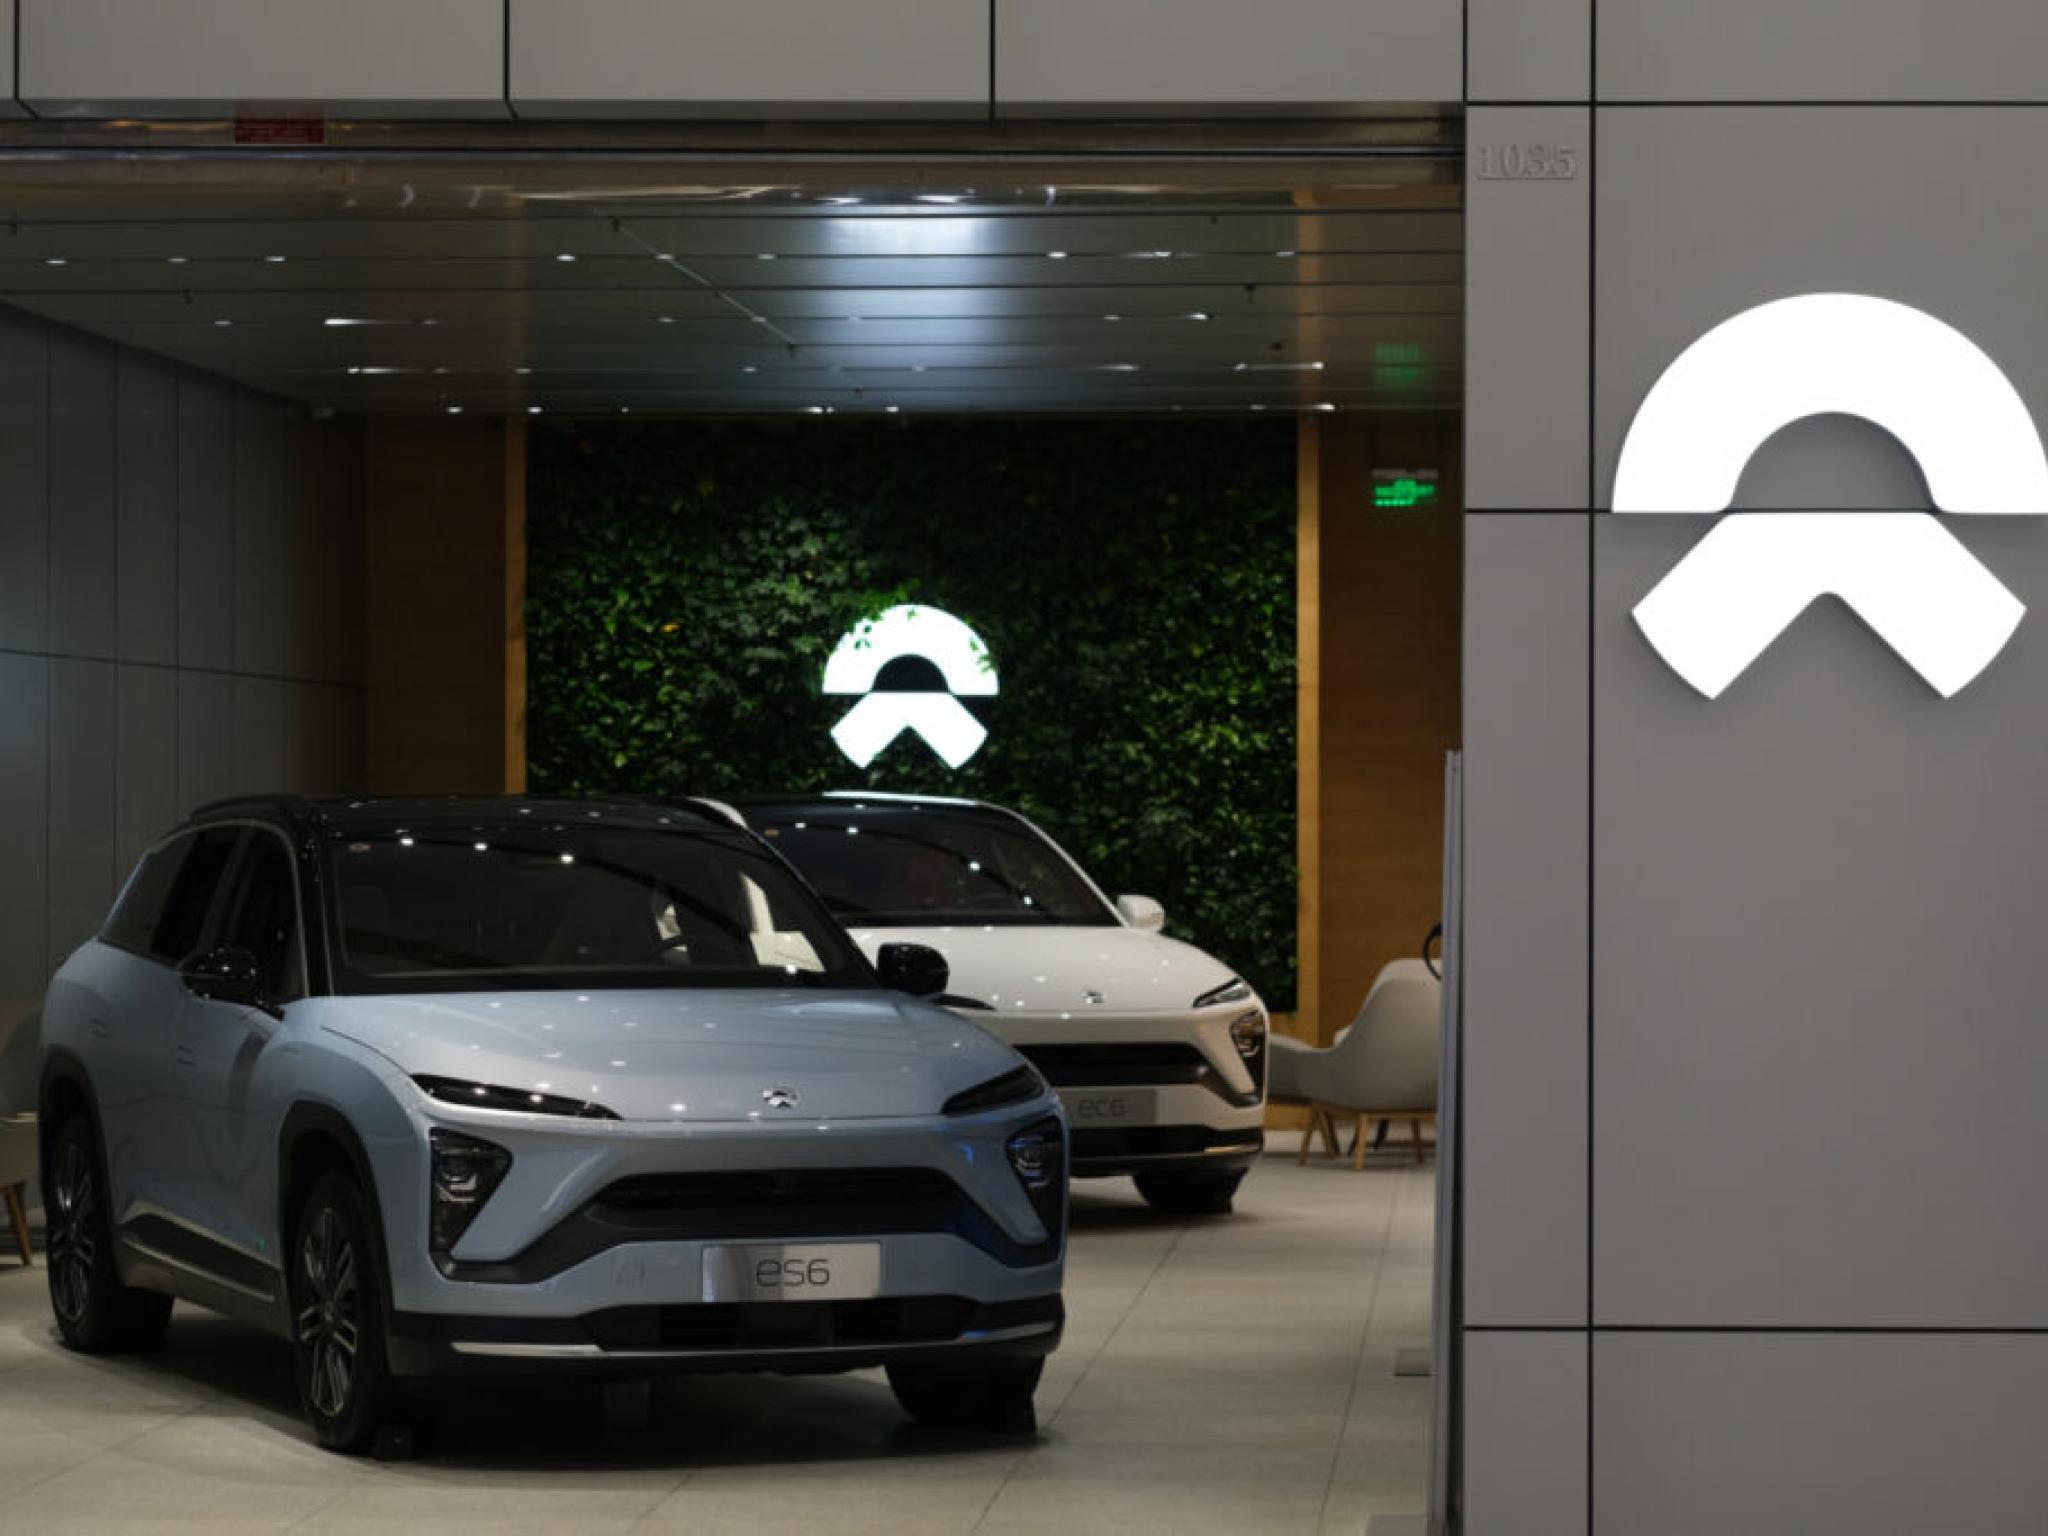  tesla-rival-nio-calls-on-ev-industry-to-research-and-tackle-battery-concerns-together-report 